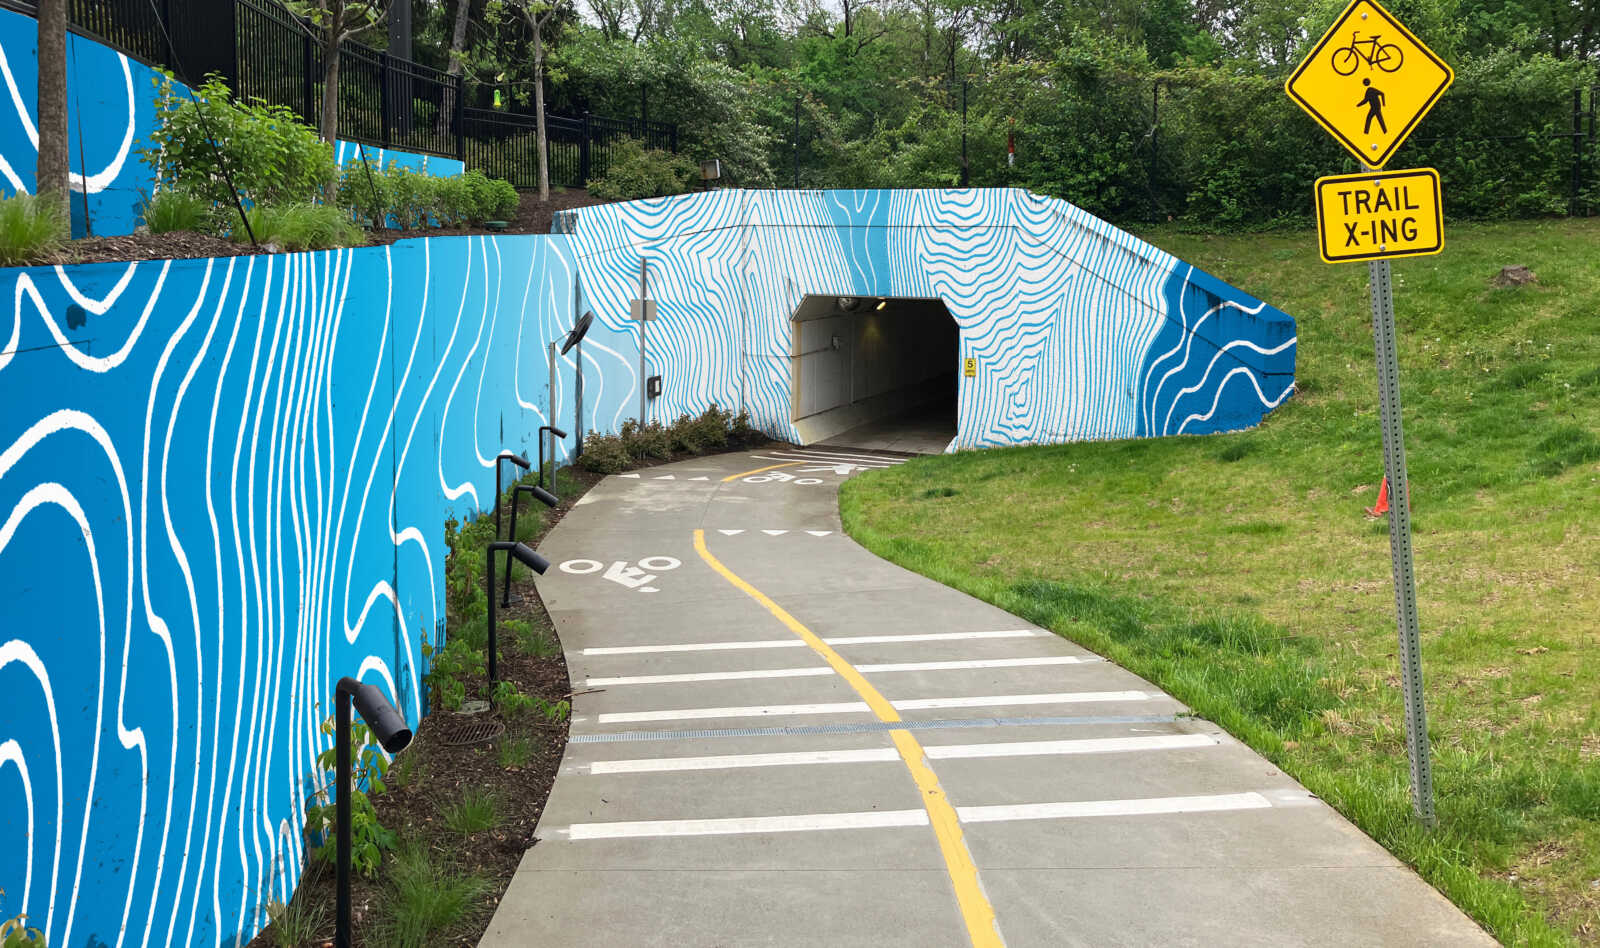 New mural to adorn trail tunnel entrance in Crystal City | ARLnow.com